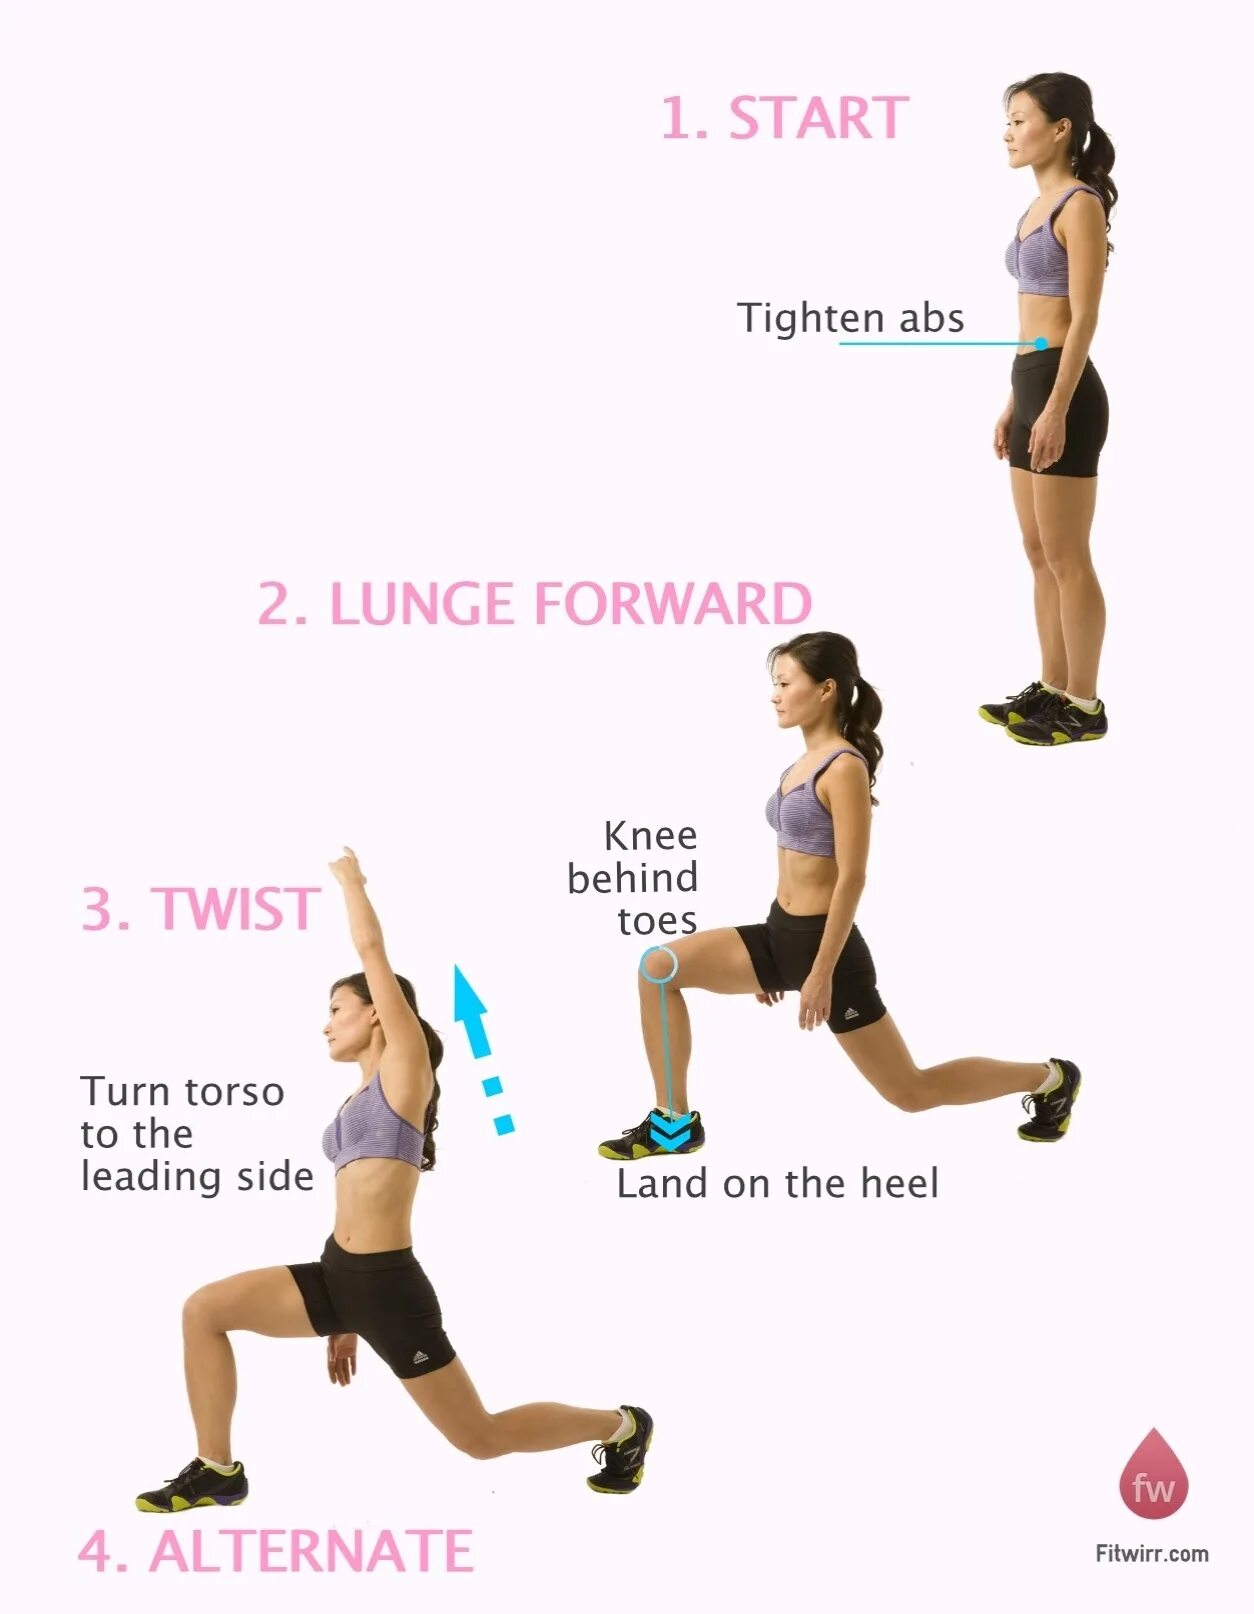 Translation exercise. Lunges упражнение. Forward Lunges упражнение. Lunges exercise. Runners Lunge упражнение.